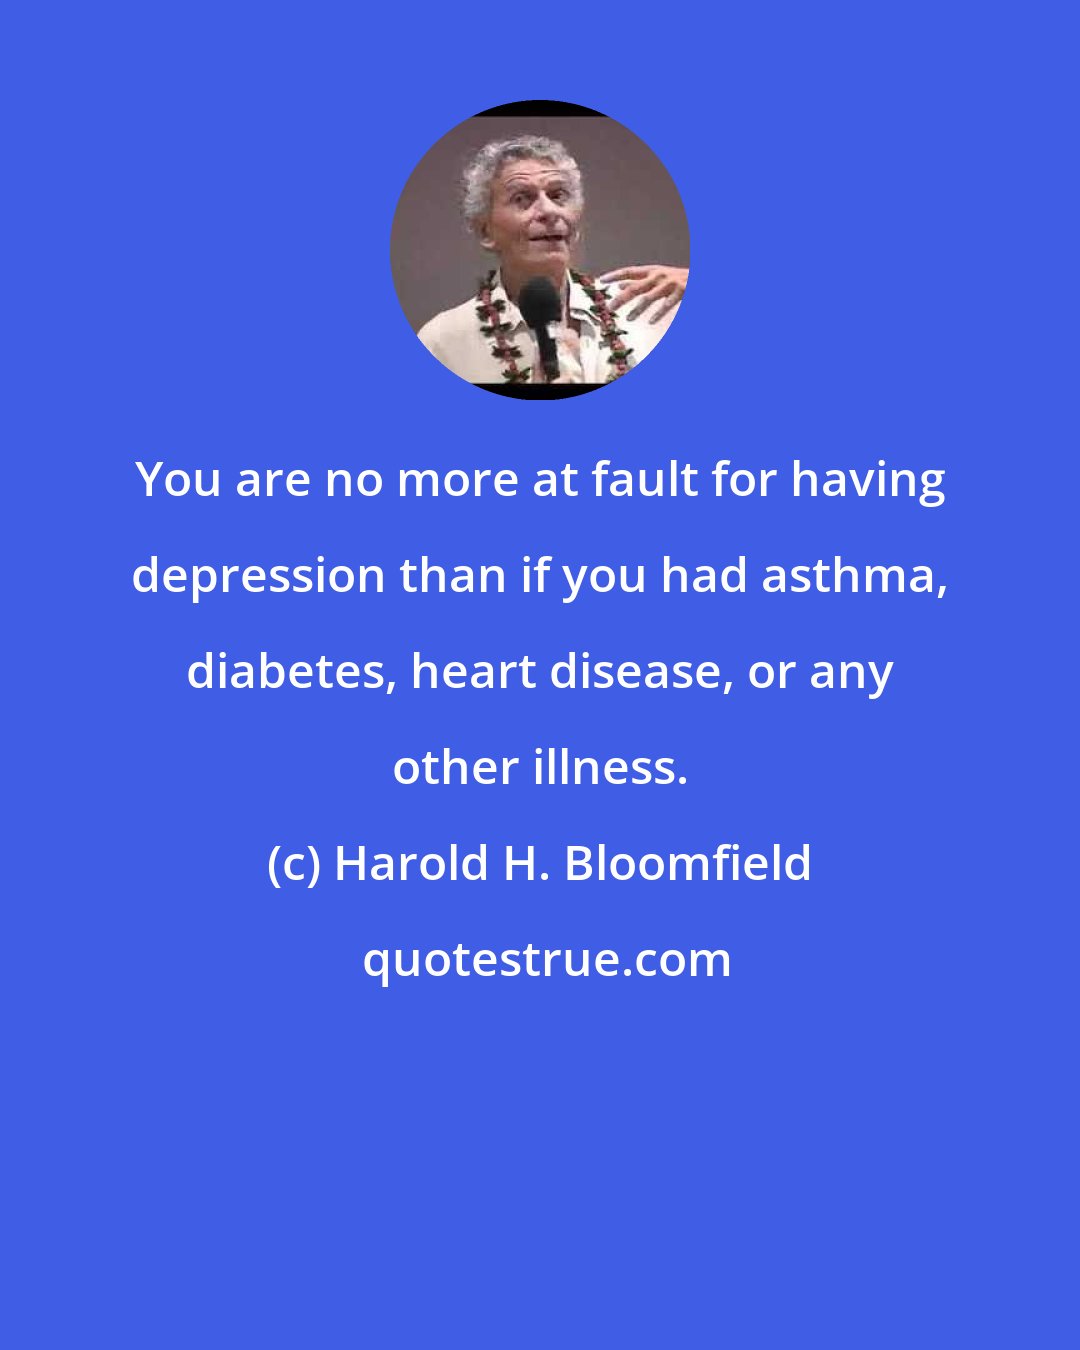 Harold H. Bloomfield: You are no more at fault for having depression than if you had asthma, diabetes, heart disease, or any other illness.